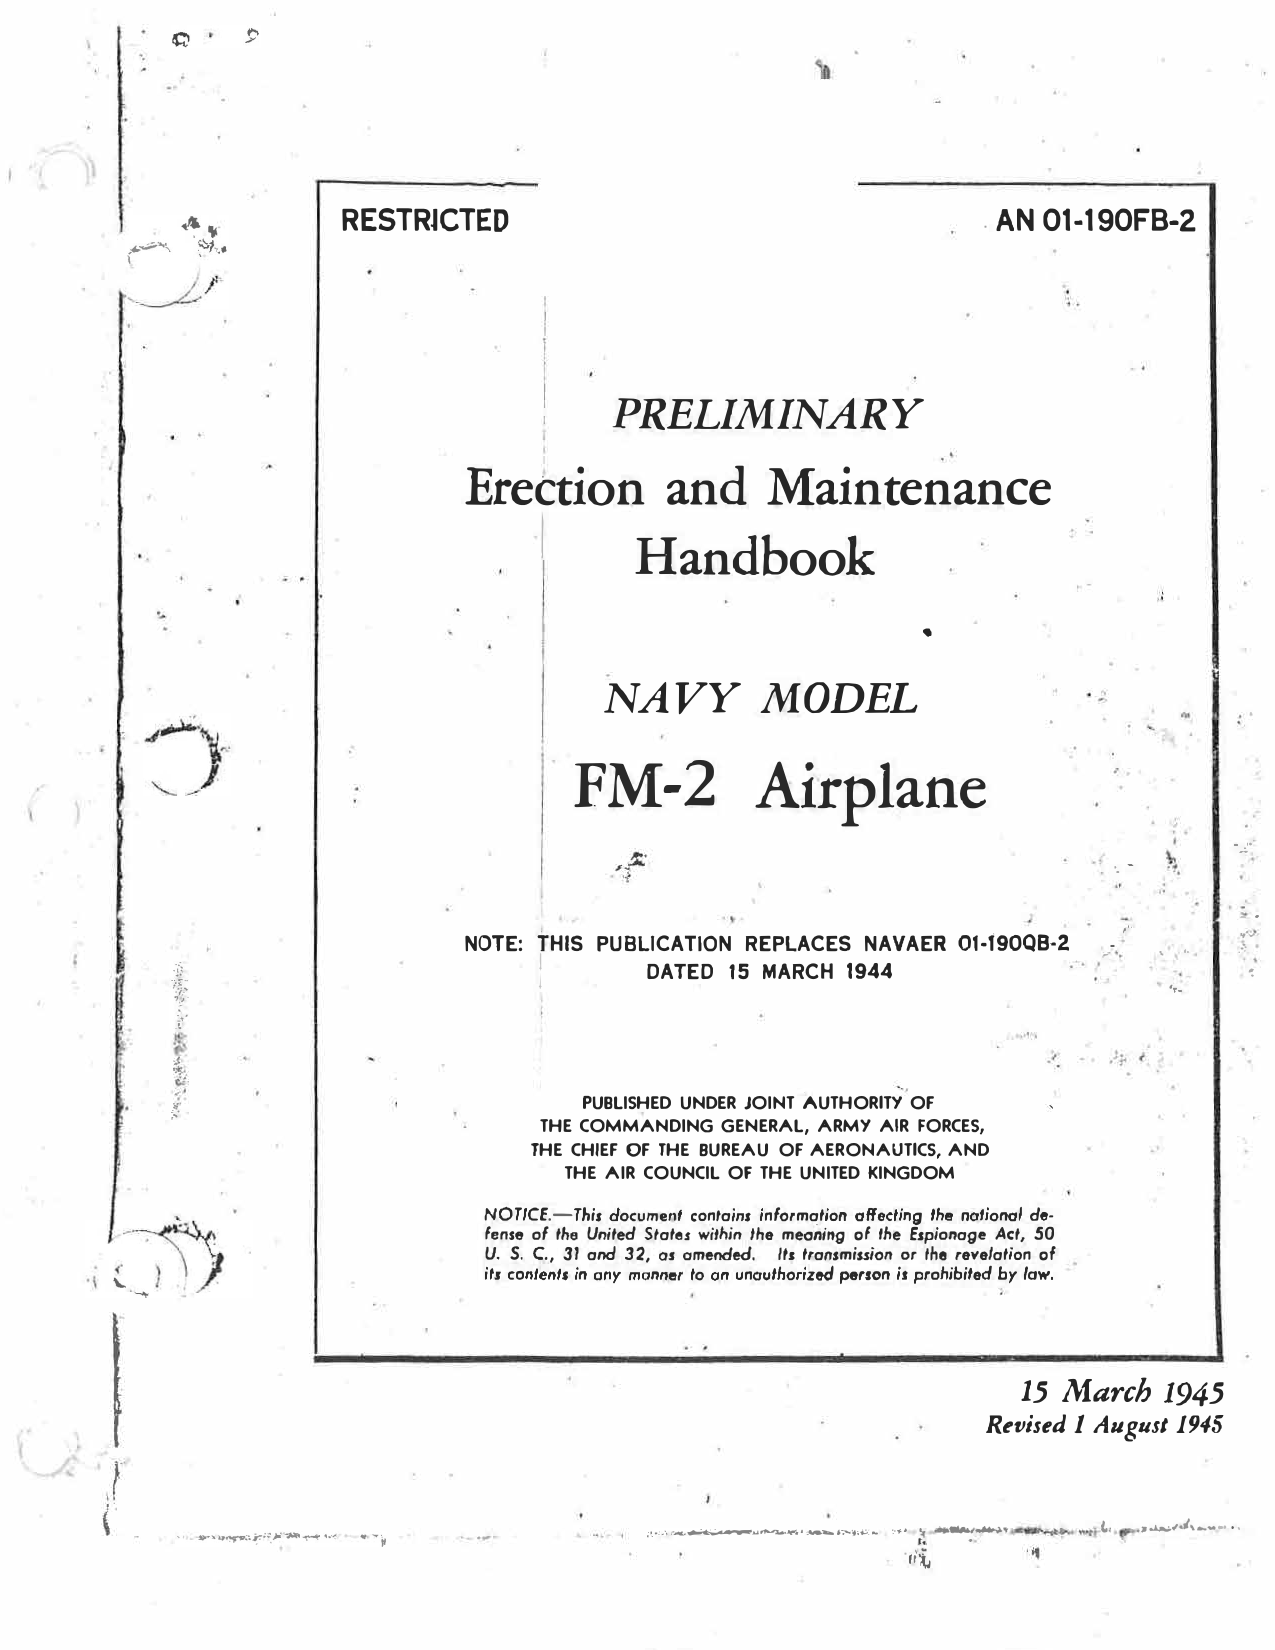 Sample page 1 from AirCorps Library document: Wildcat FM-2 - Preliminary Erection & Maintenance Handbook